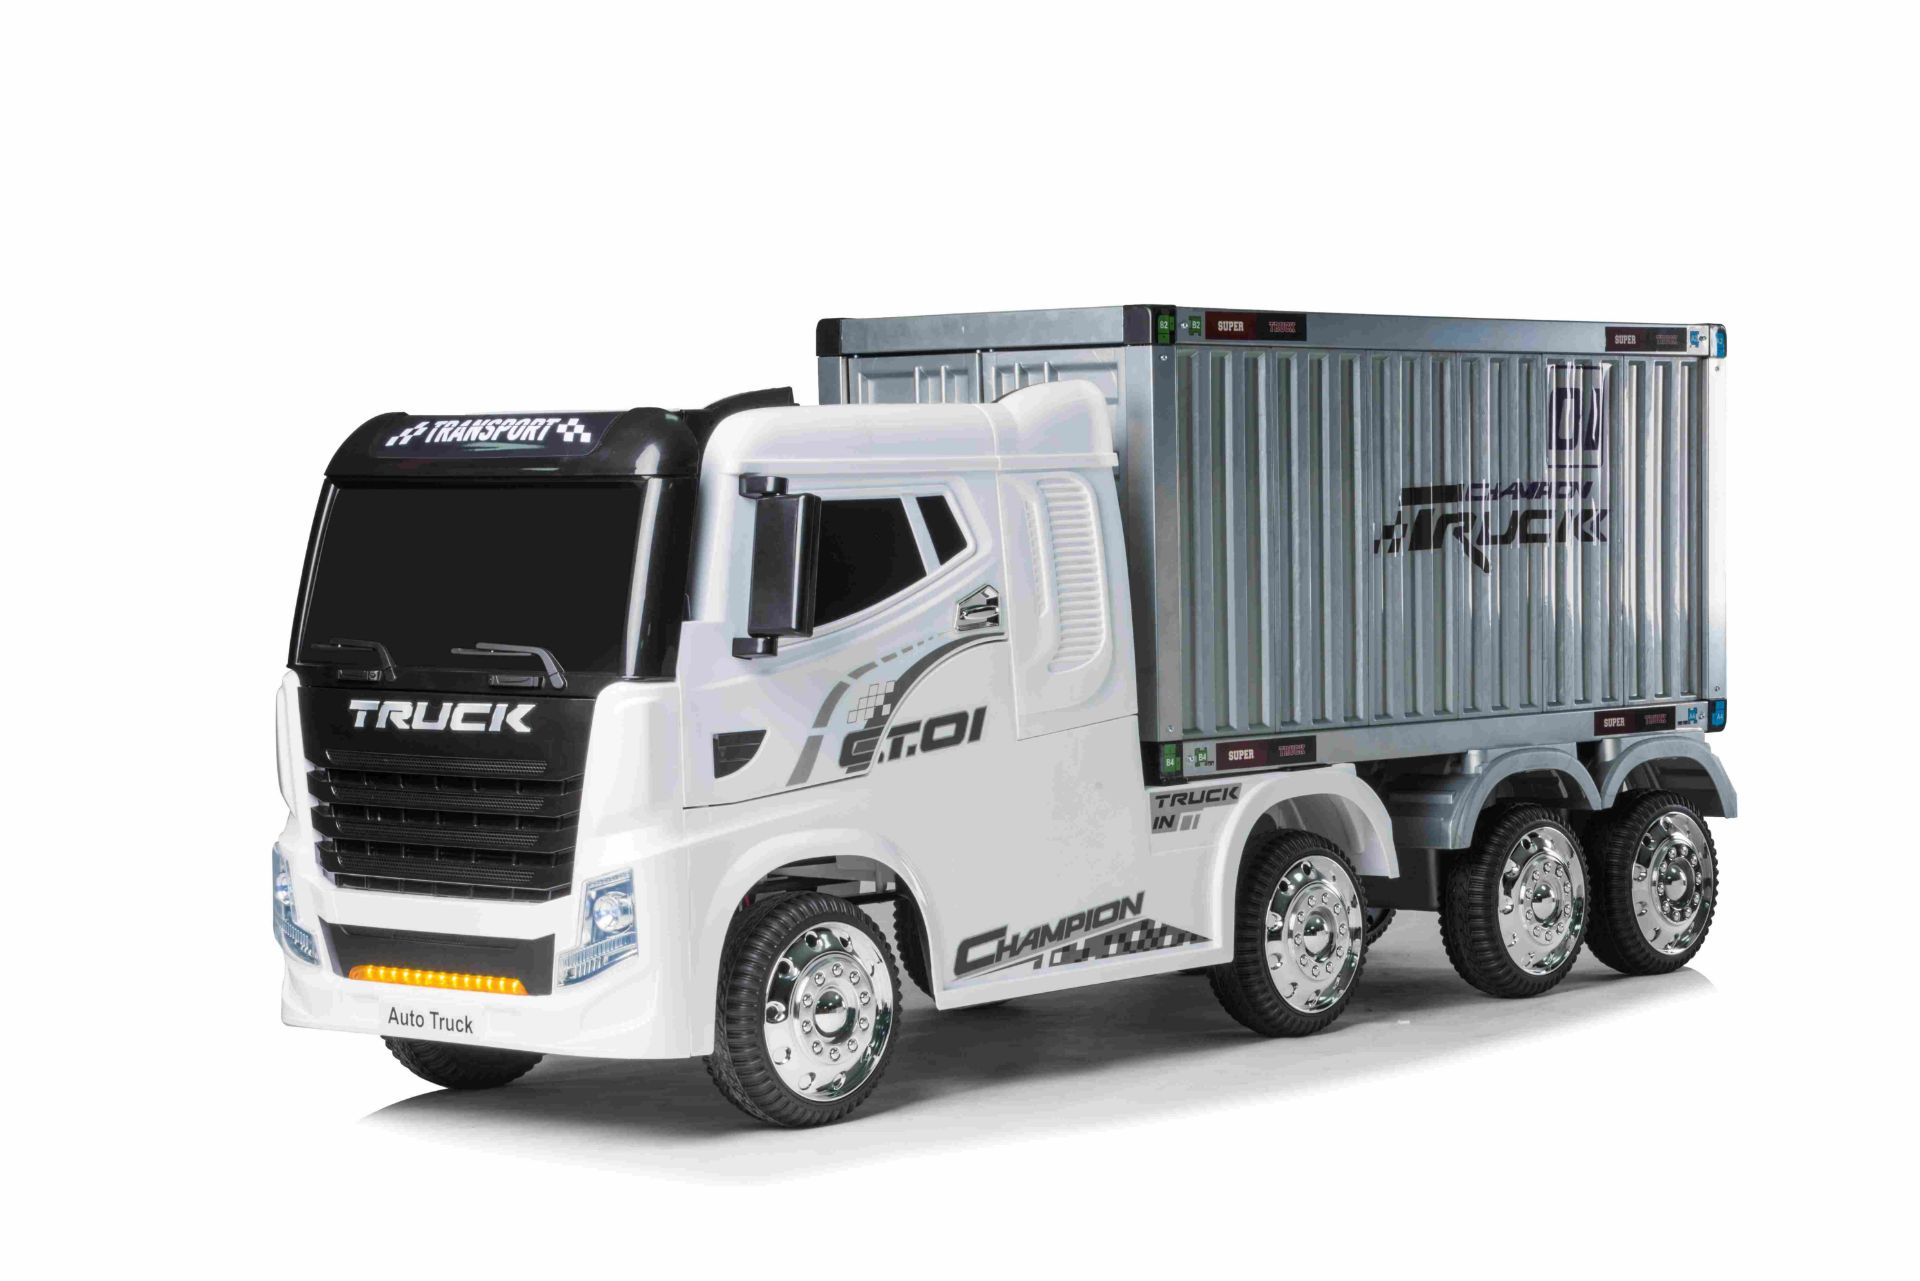 Ride On Truck with Detachable Container and Parental Remote Control 12V 4 Wheel Drive JJ2011 - White - Image 2 of 6